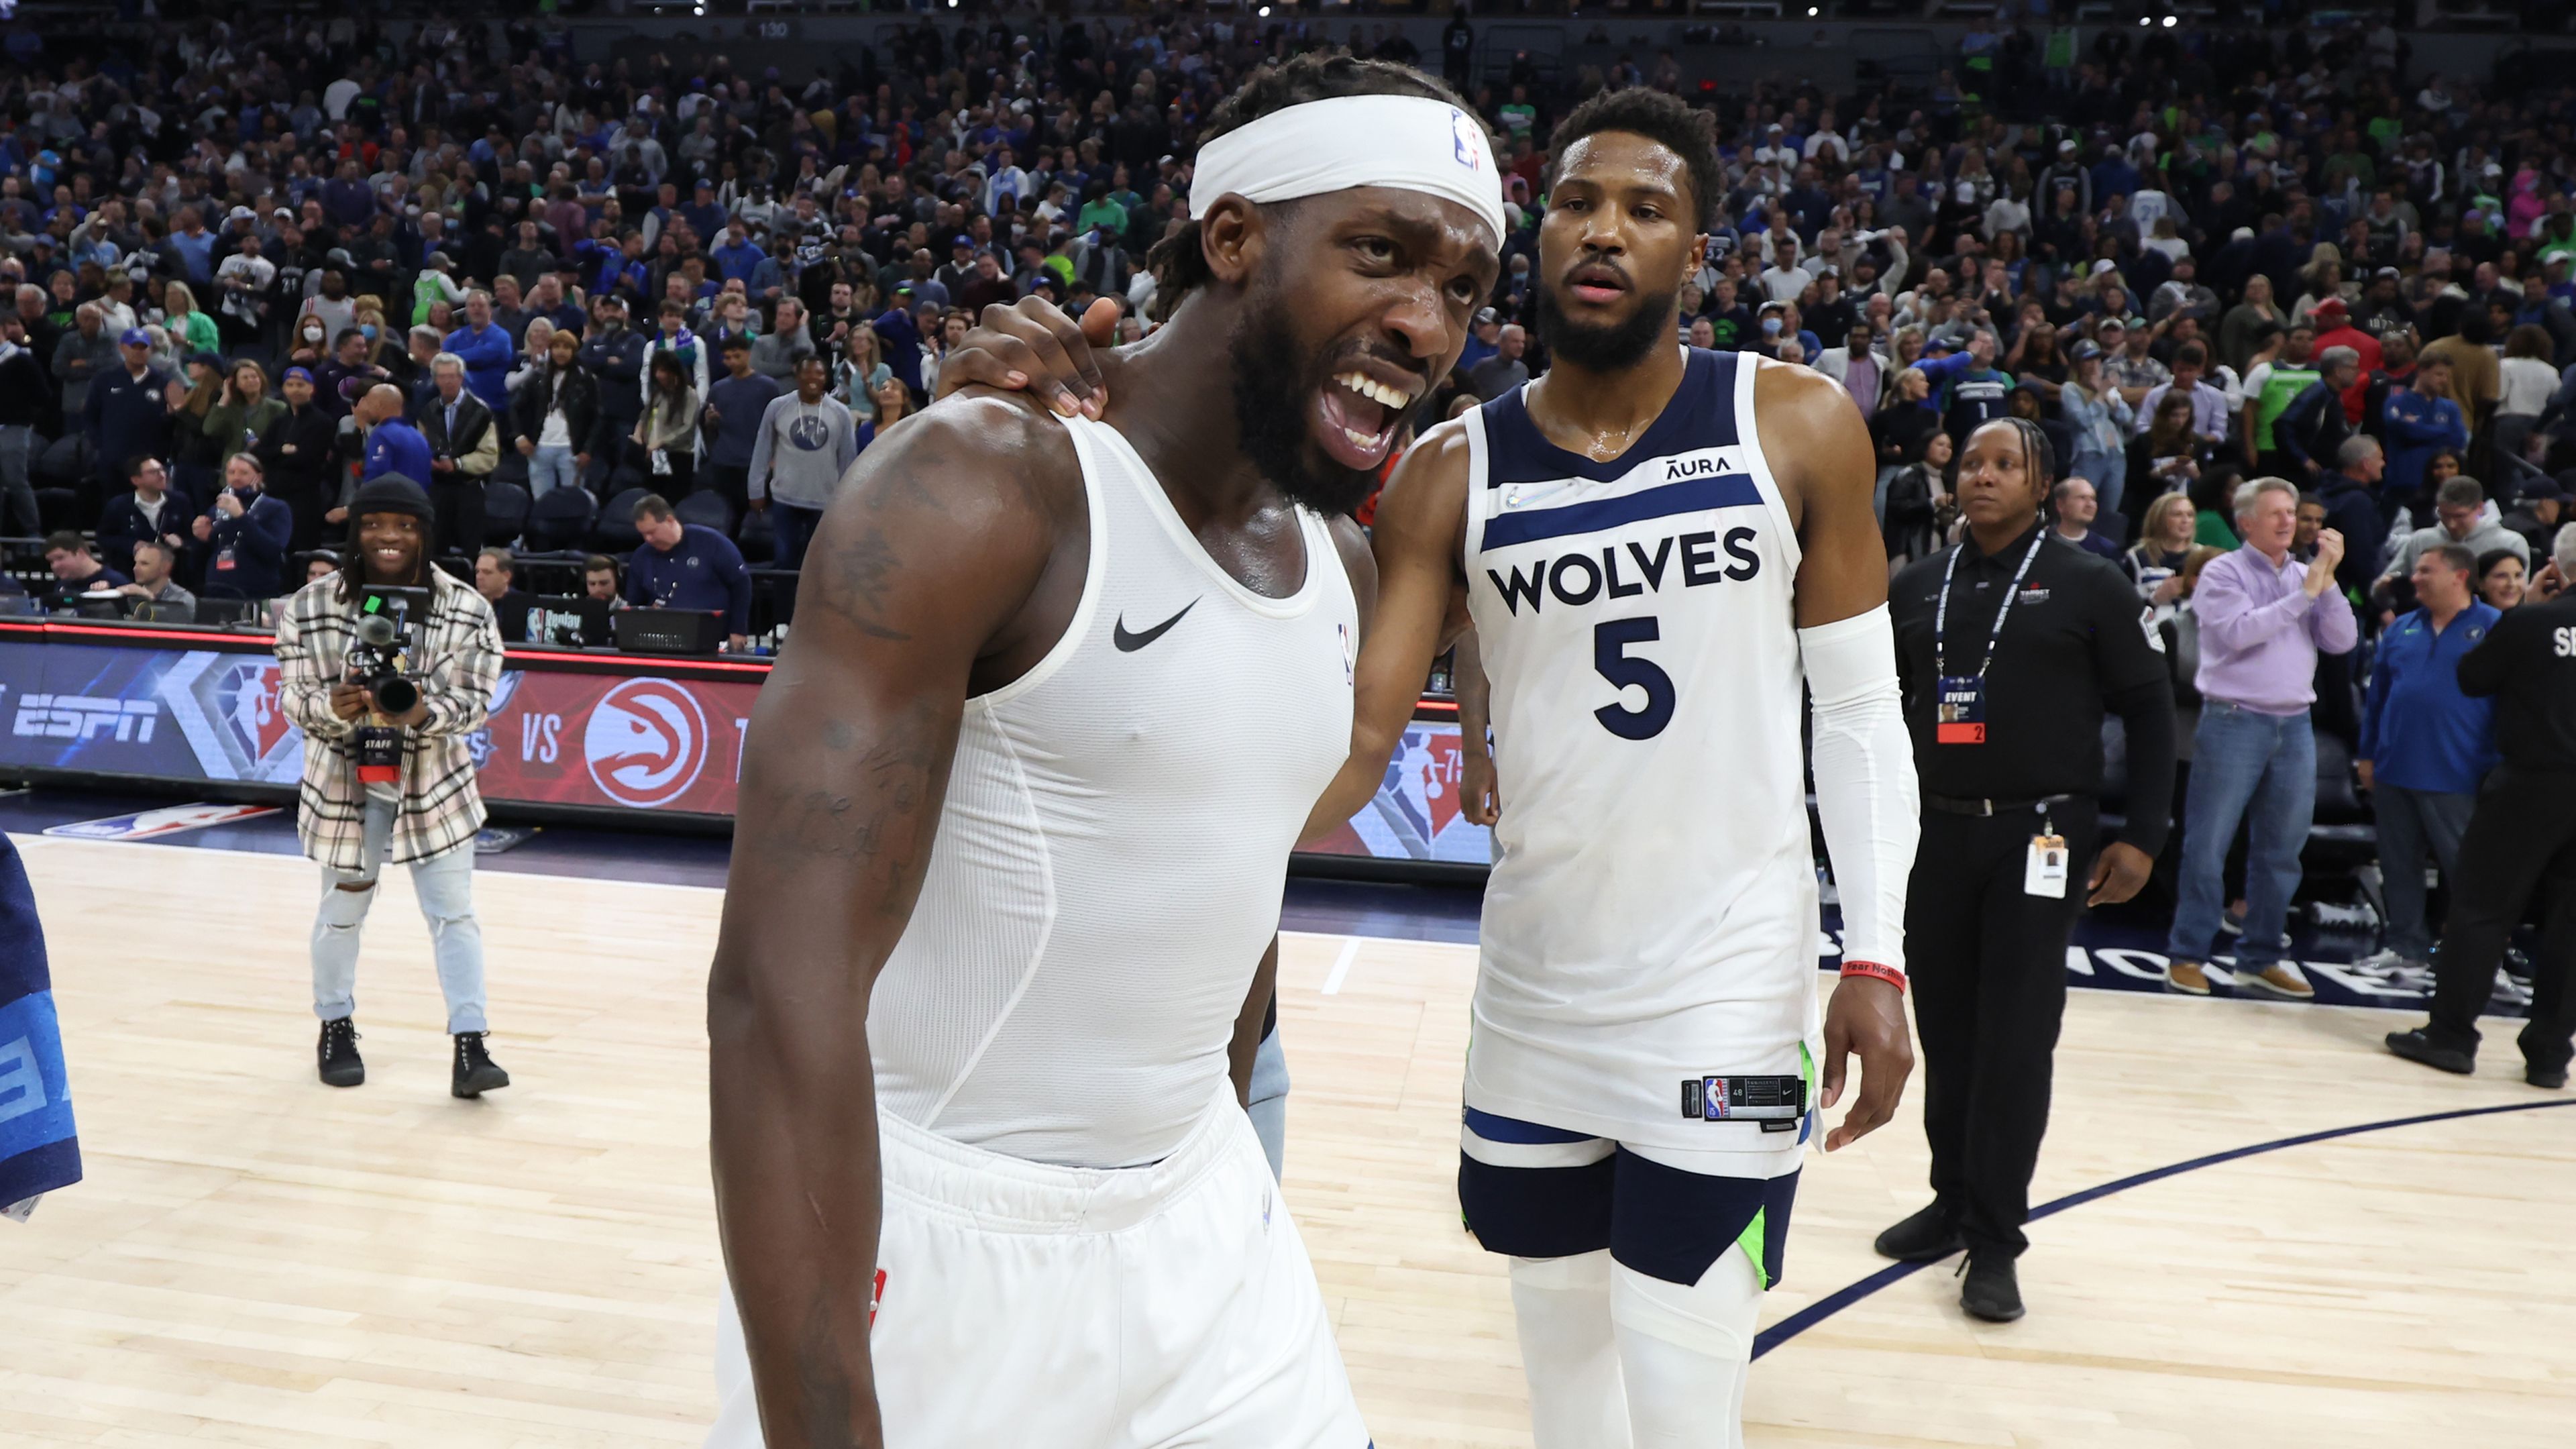 Patrick Beverley divides NBA with antics after leading Timberwolves to victory over Clippers